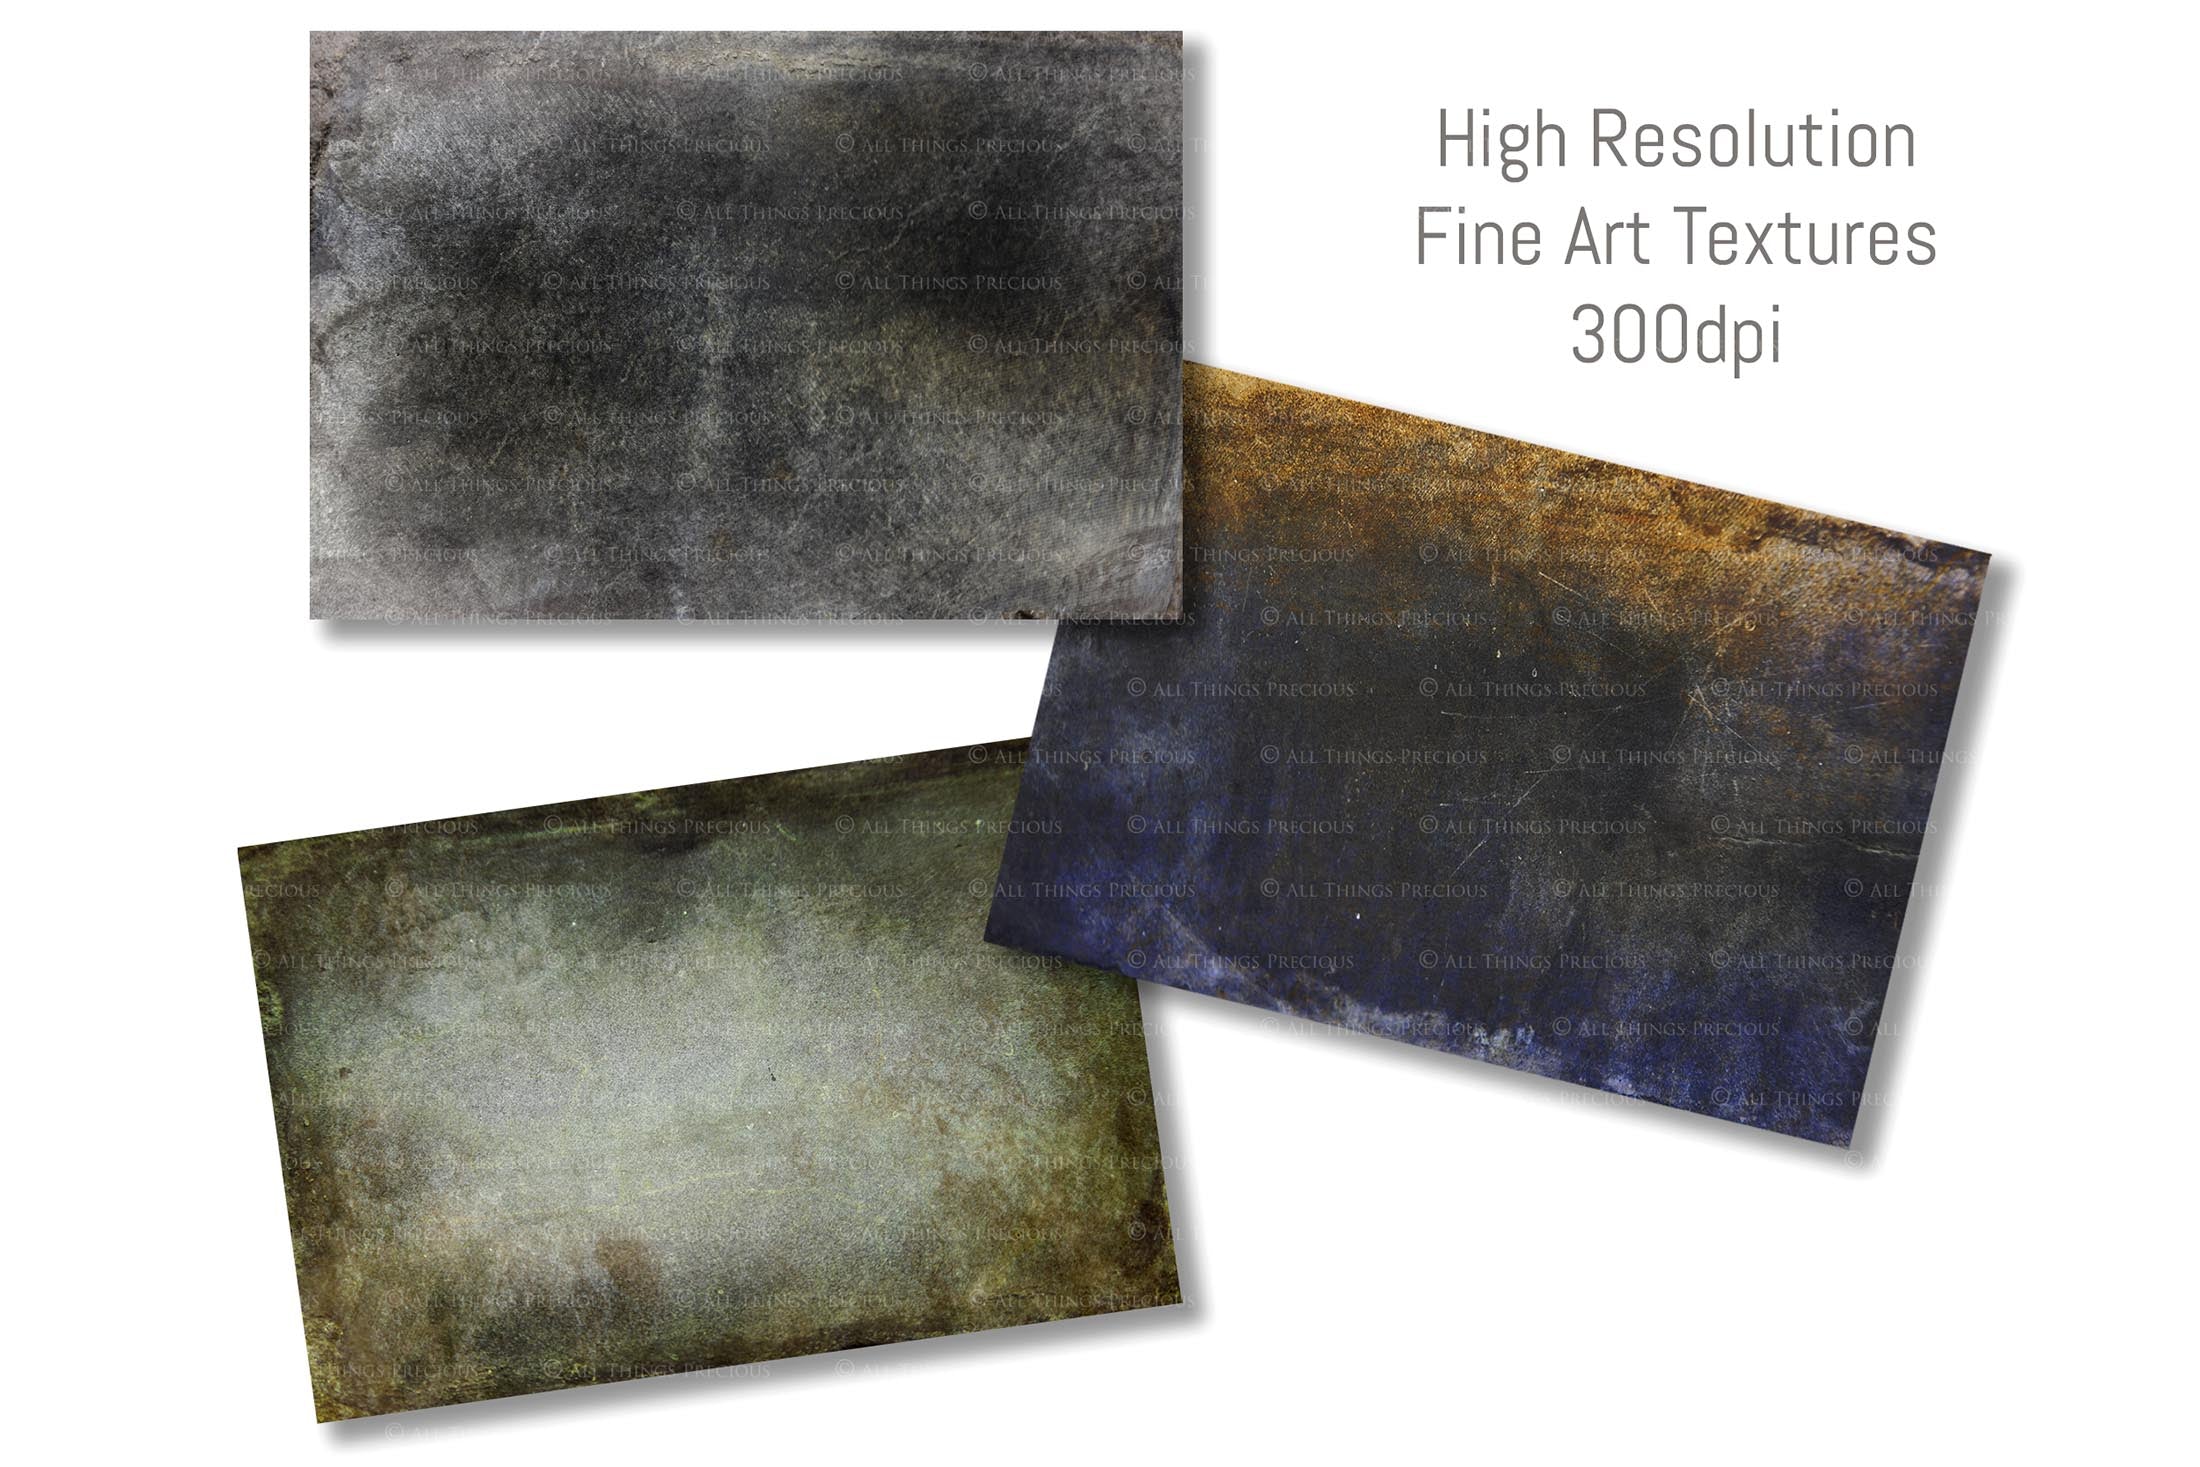 Fine Art Textures. For photography or print as backdrops. High resolution download files. Grunge, Warm, Light, Digital Add Ons. Canvas, Dark, Painterly, Color design. Digital Background Jpeg overlay. Scrapbooking Paper, Printable Wall Art, Photoshop photography editing Graphic Assets. by ATP textures.